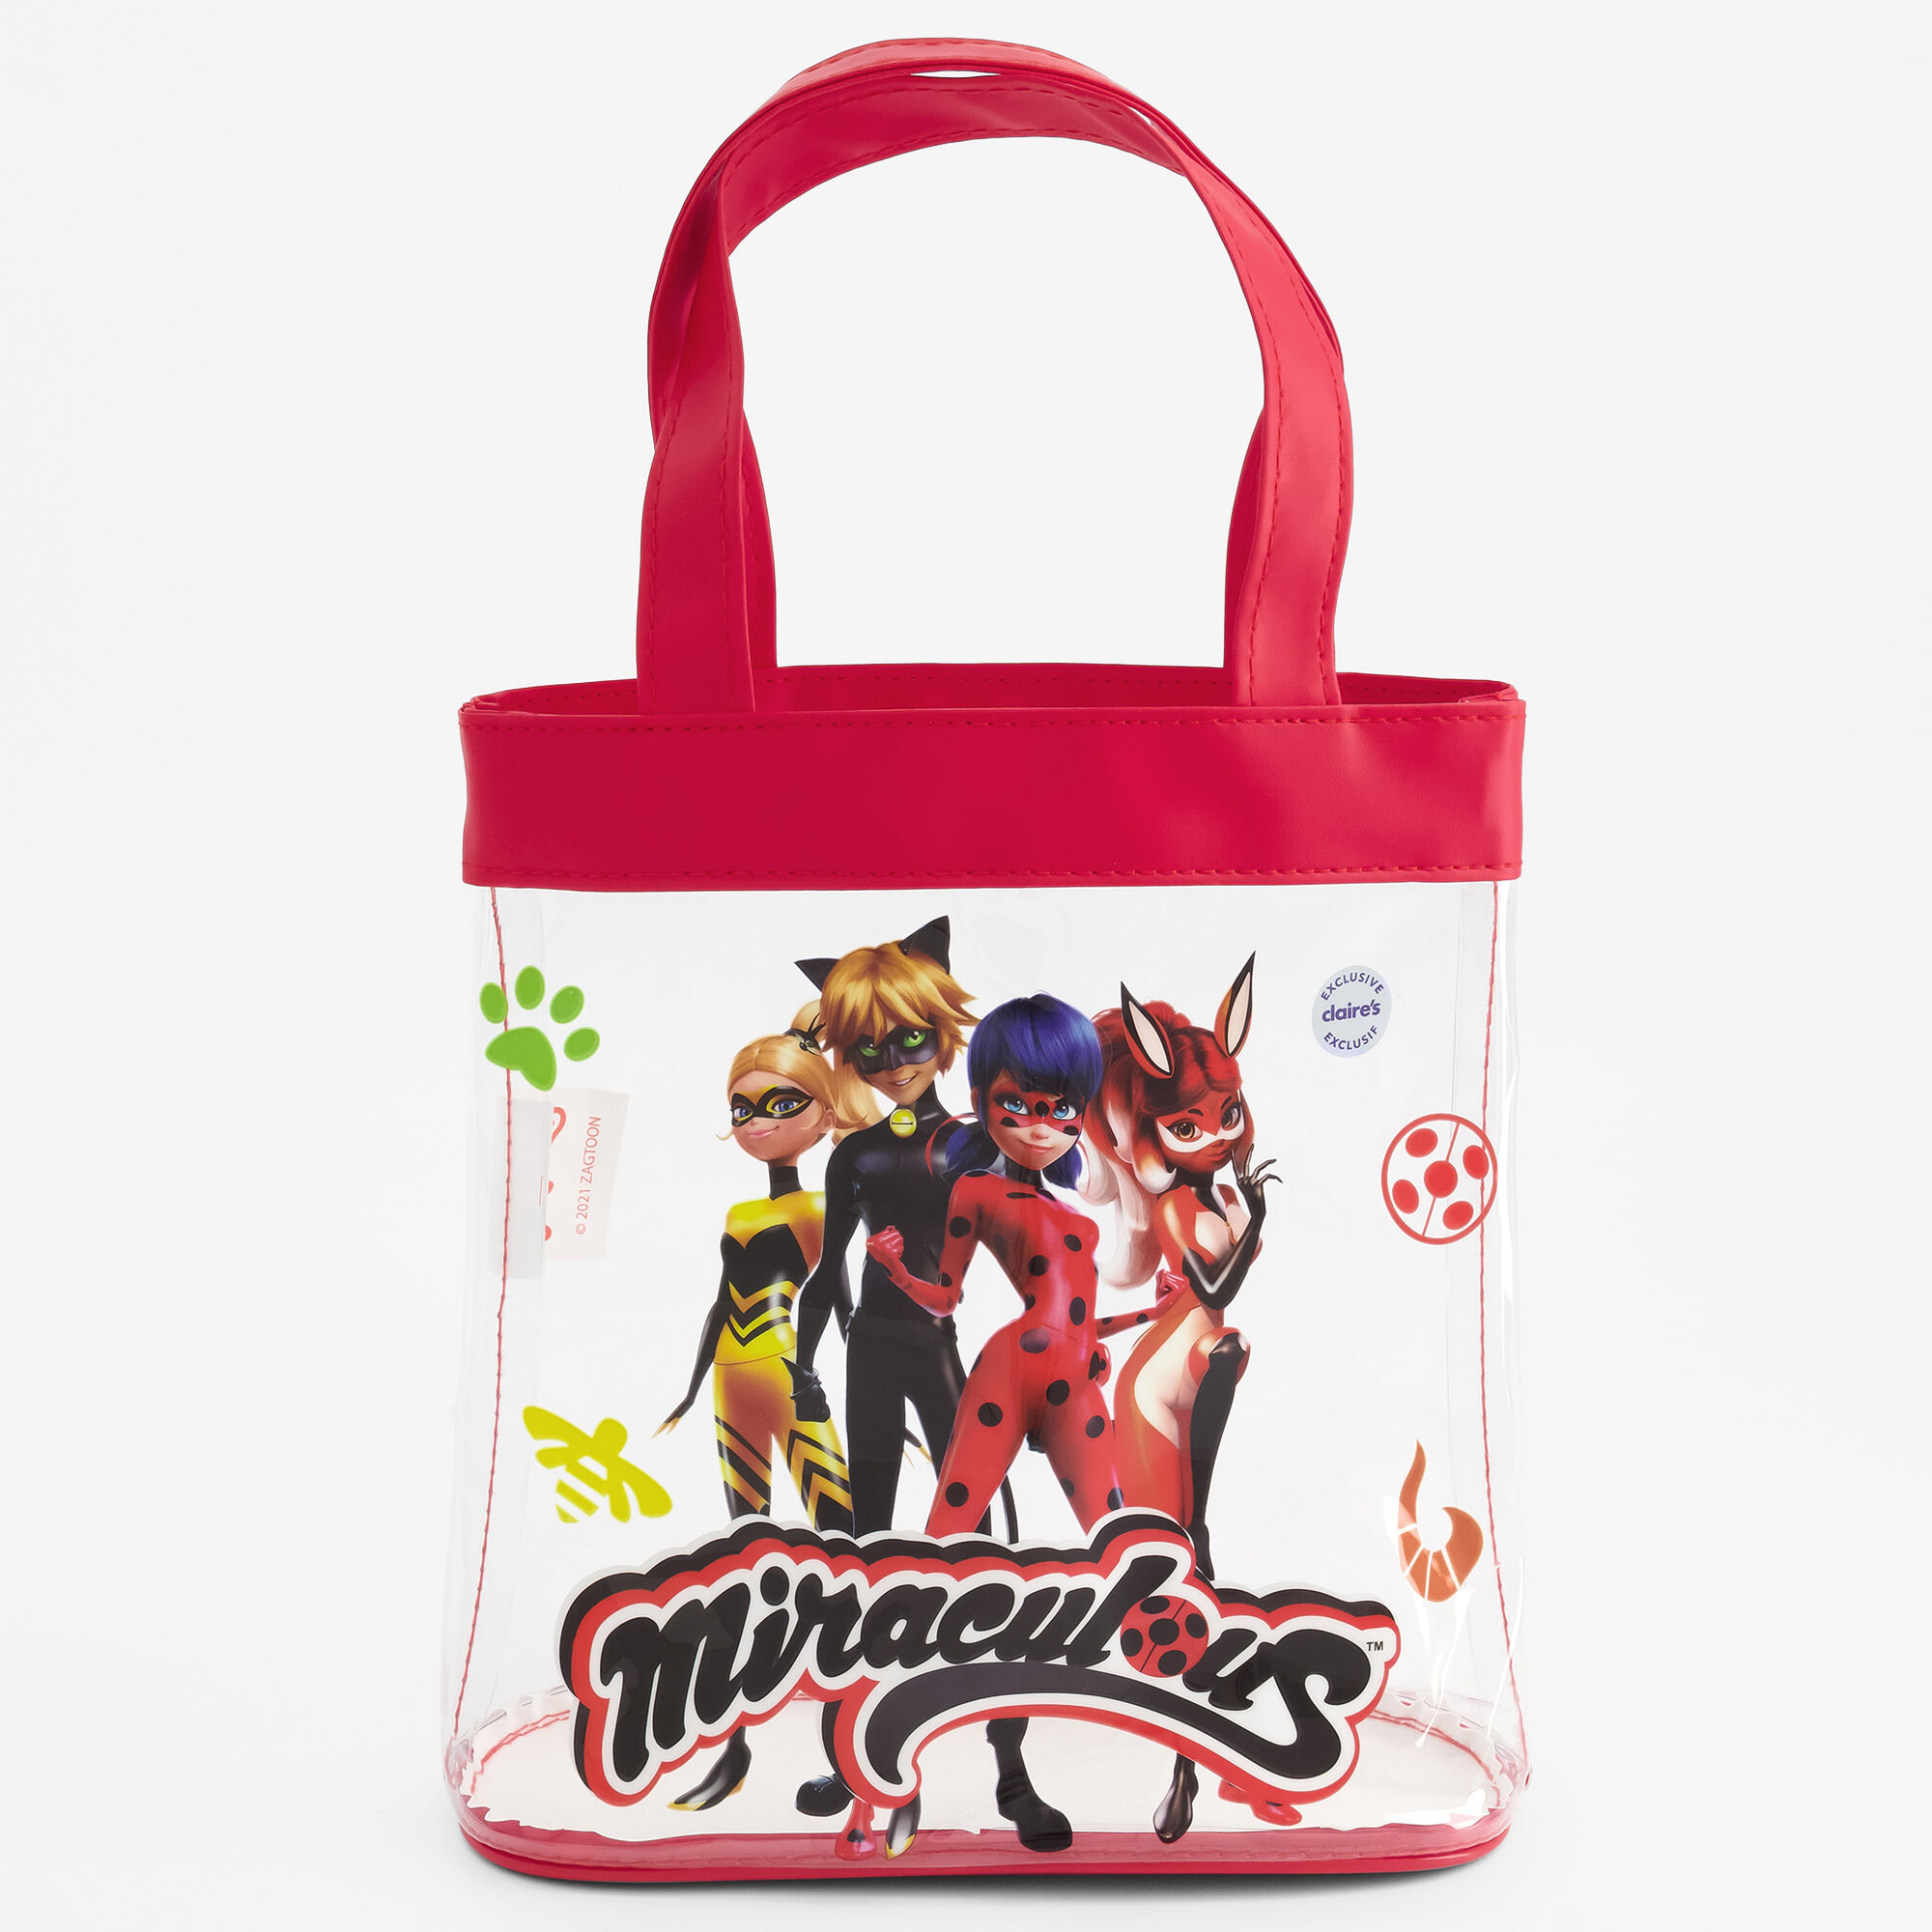 View Claires Miraculous Tote Bag Red information